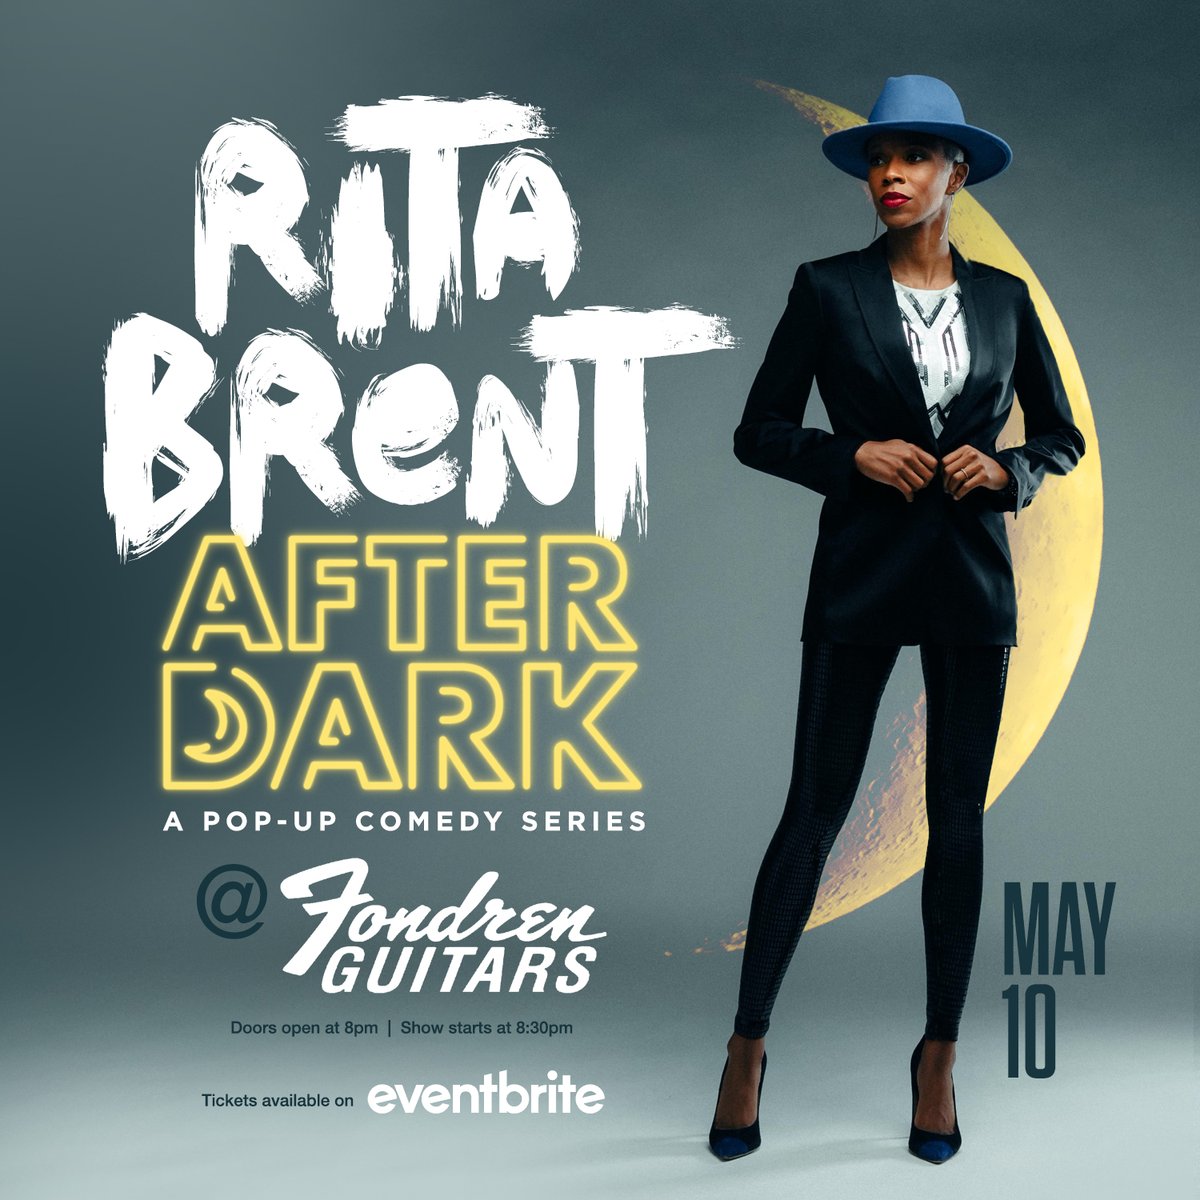 Comedian Rita Brent is performing LIVE at Fondren Guitars, Fri., May 10! Working out BRAND NEW material for her one woman show in NYC (June)! LIMITED SEATING! Get tickets while they last: eventbrite.com/e/comedian-rit…